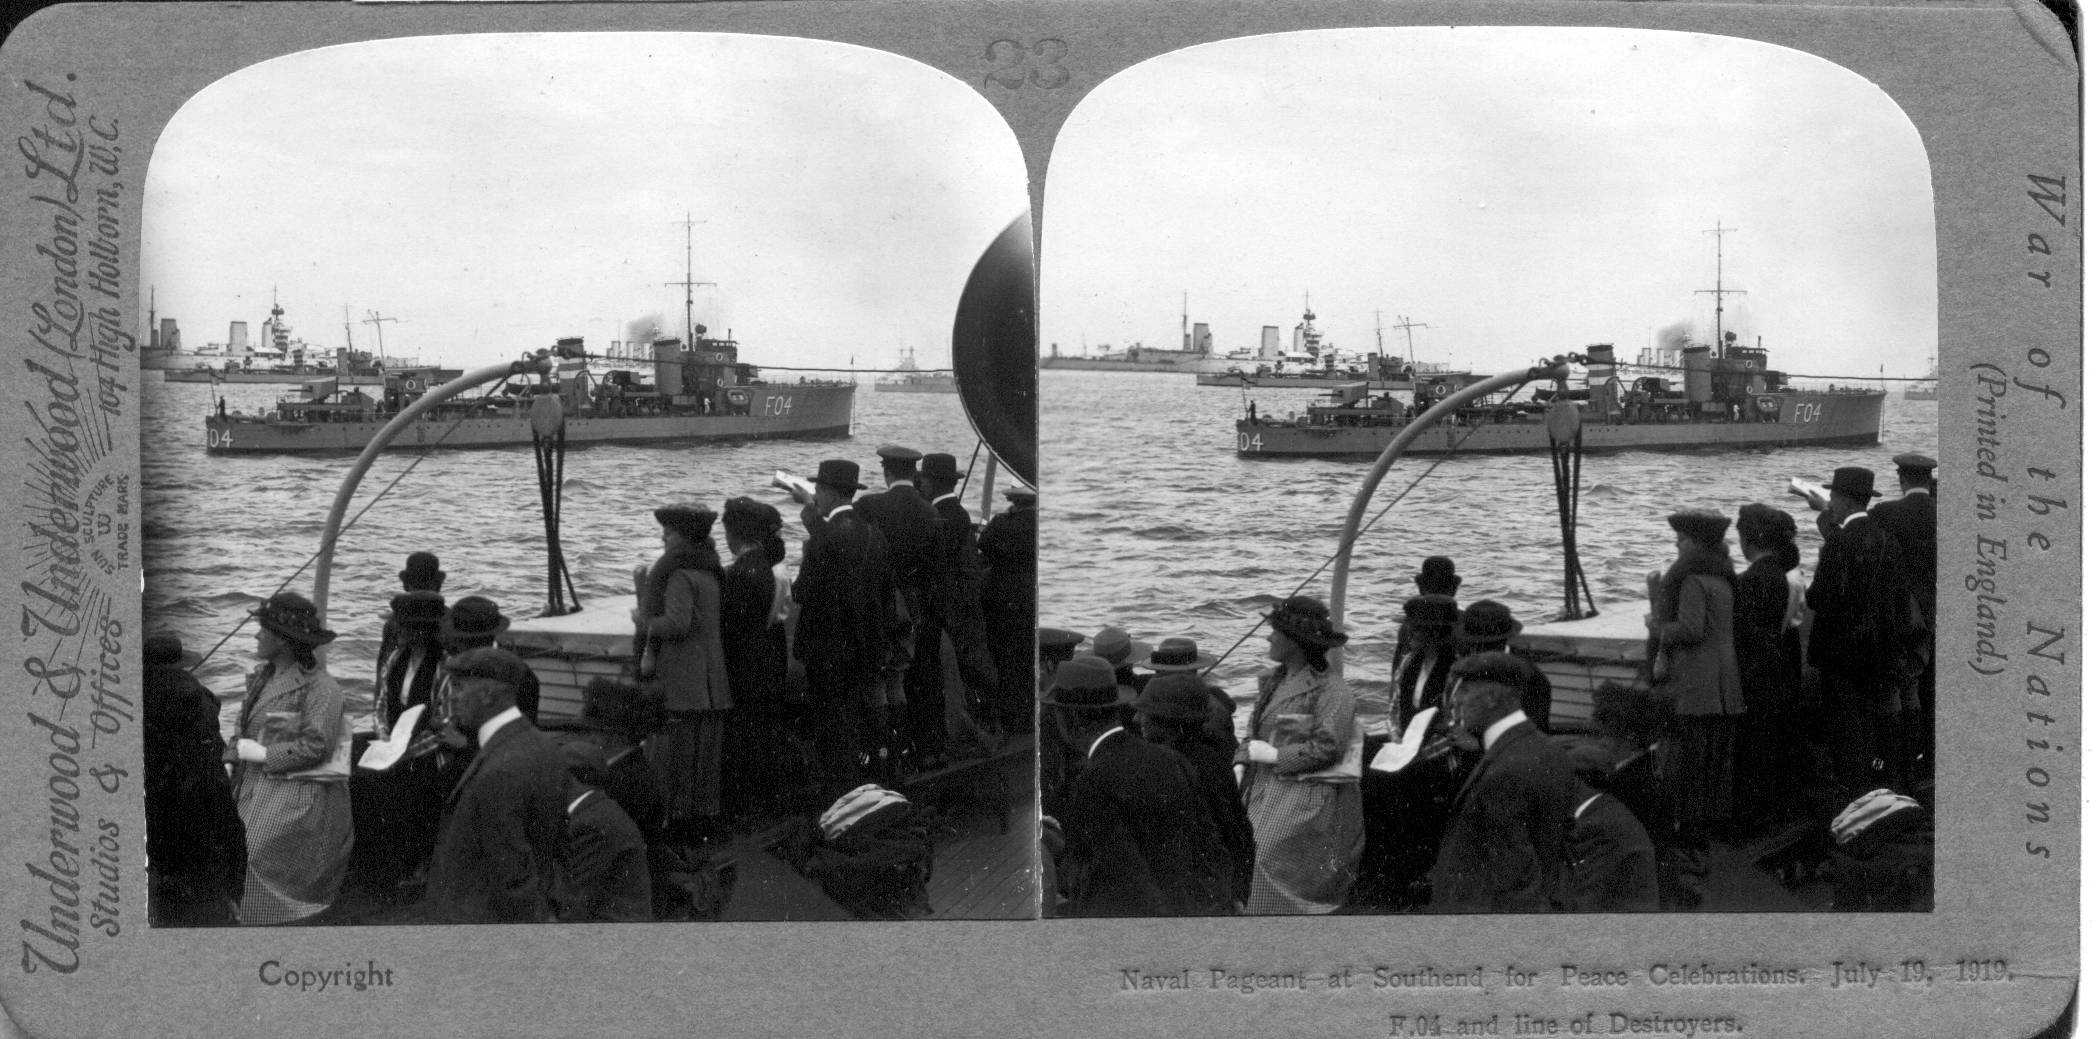 Naval Pageant at Southend for Peace Celebrations. July 19, 1919, F-04 and line of Destroyers